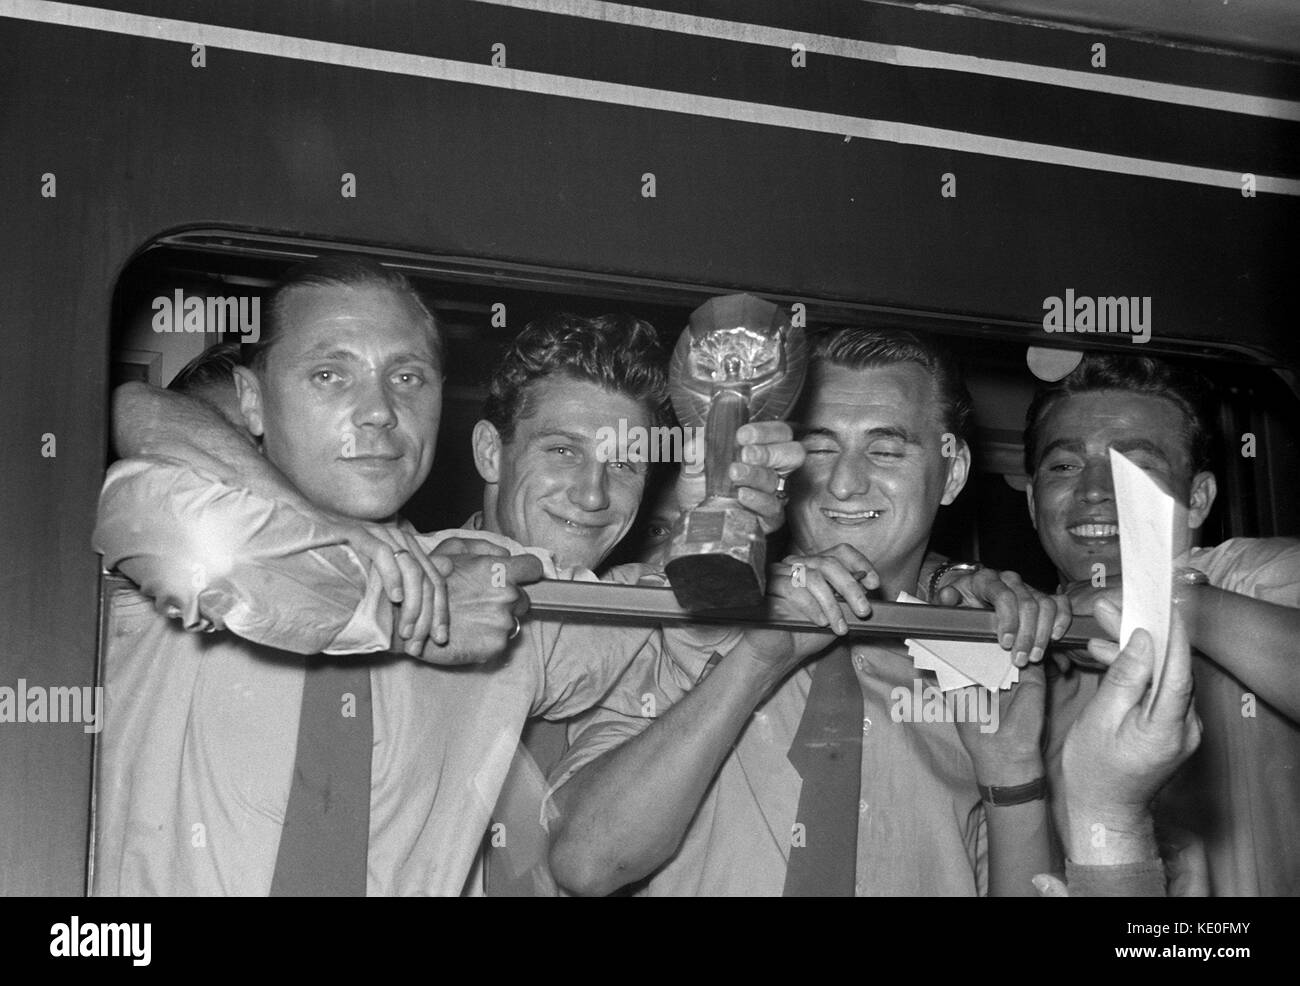 Singen, Germany. 5th July, 2017. ARCHIVE - The players Max Morlock (L-R), Hans Schaefer, Jupp Posipal, Hans Bauer of the German national soccer team show the Jules-Rimet-Cup at the train window at the train station in Singen, Germany, 5 July 2017. The German national soccer team won the world cup in Bern, Switzerland, the previous day. Hans Schaefer will turn 90 years old on the 19th of October 2017. Credit: Richard Kroll/dpa/Alamy Live News Stock Photo